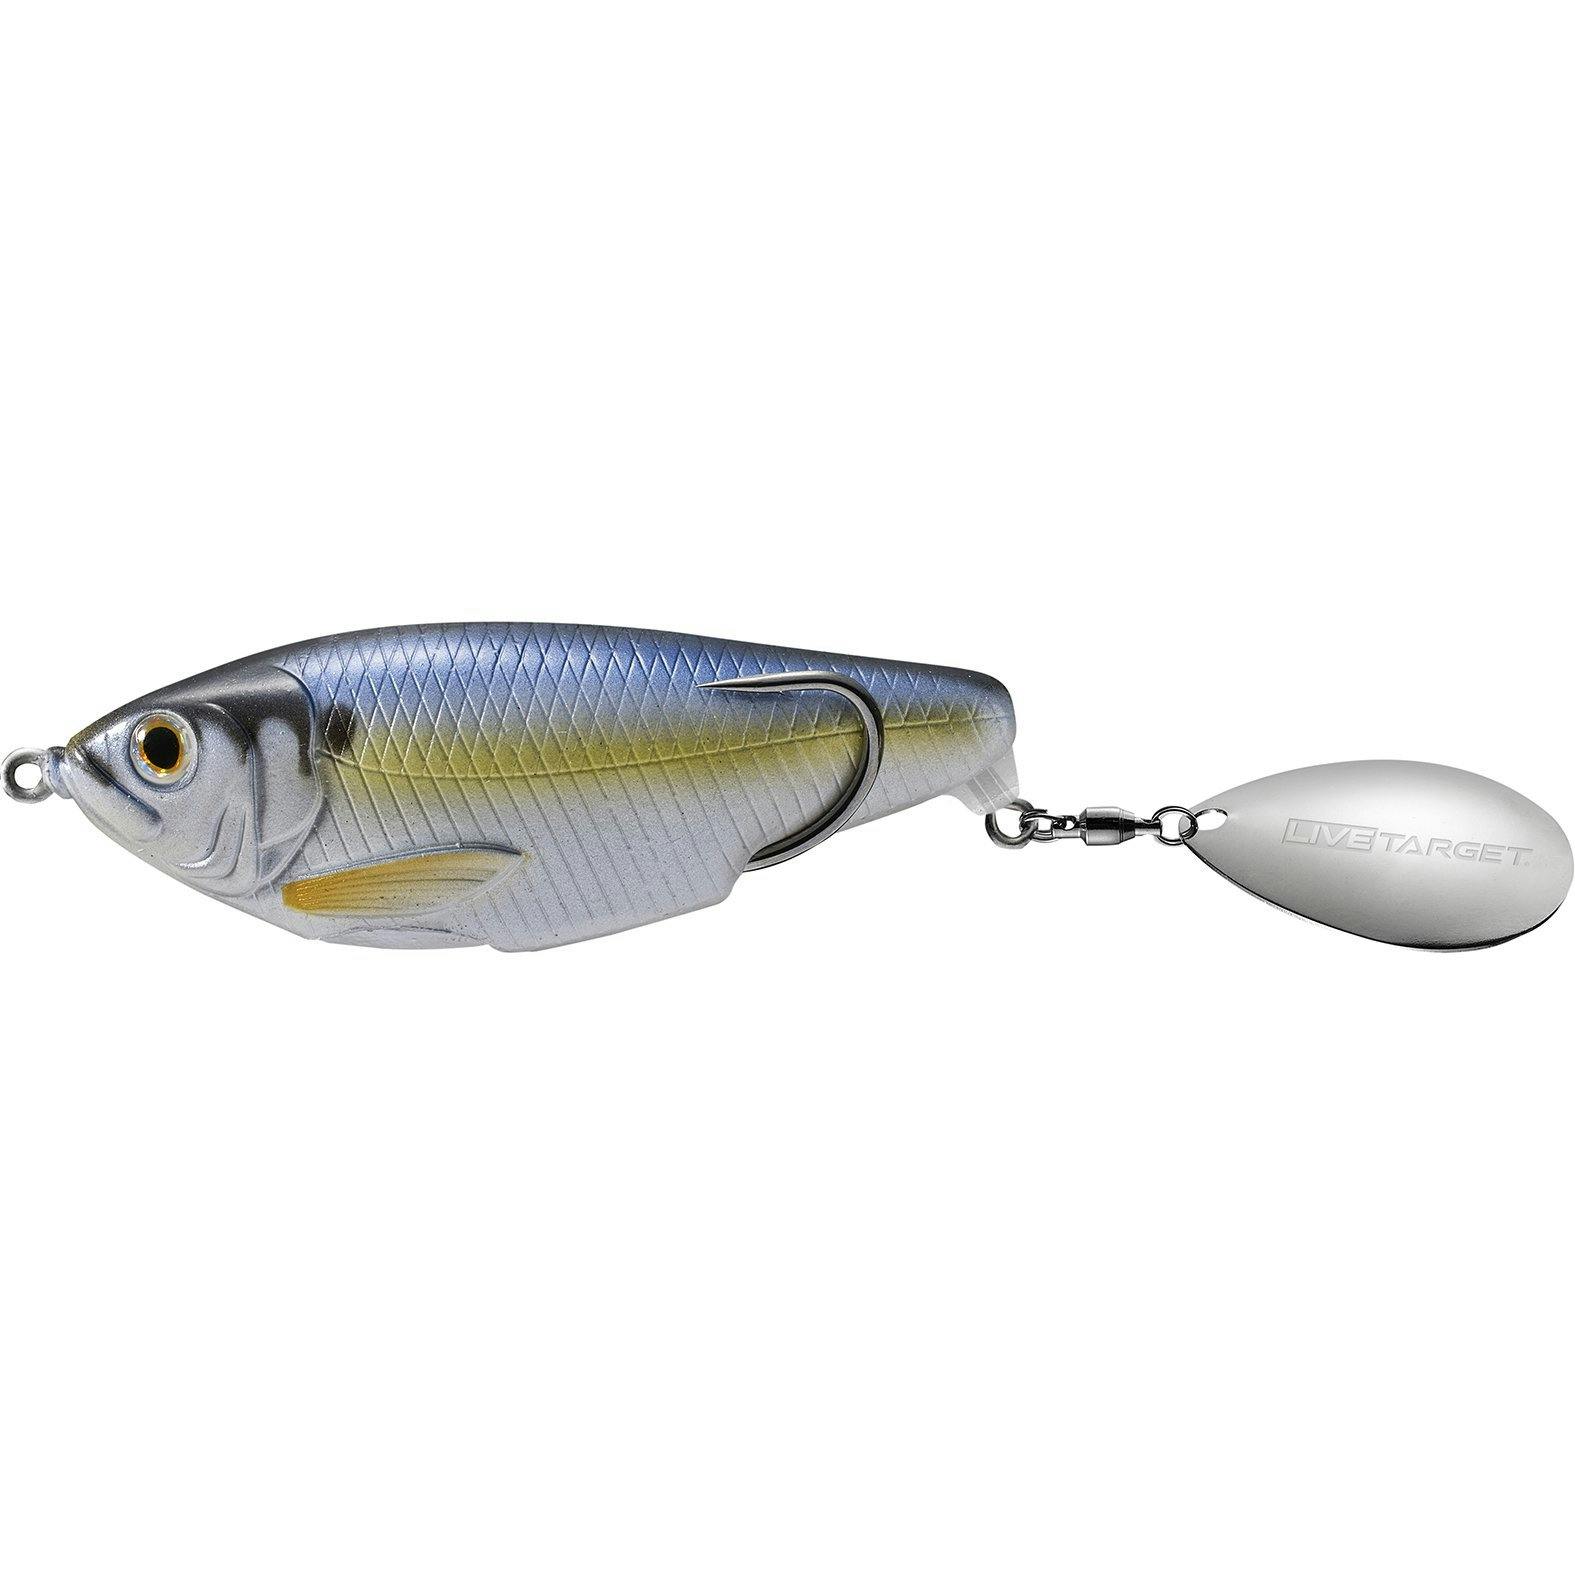 LiveTarget Commotion Shad - Pearl Blue Shad / 3 1/2"